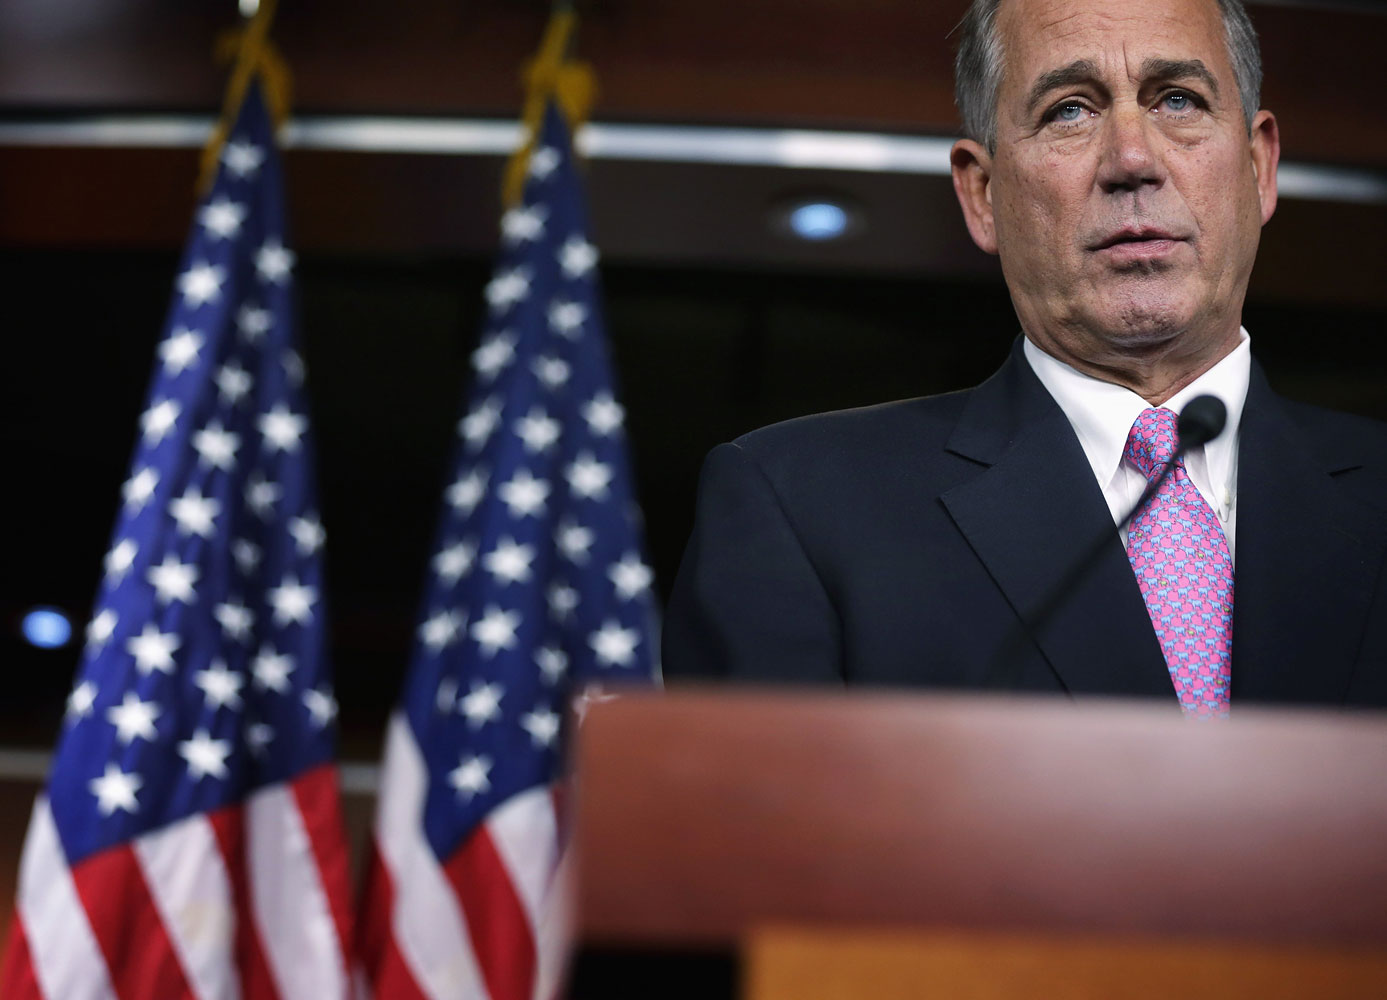 John Boehner Holds Media Briefing At The Capitol